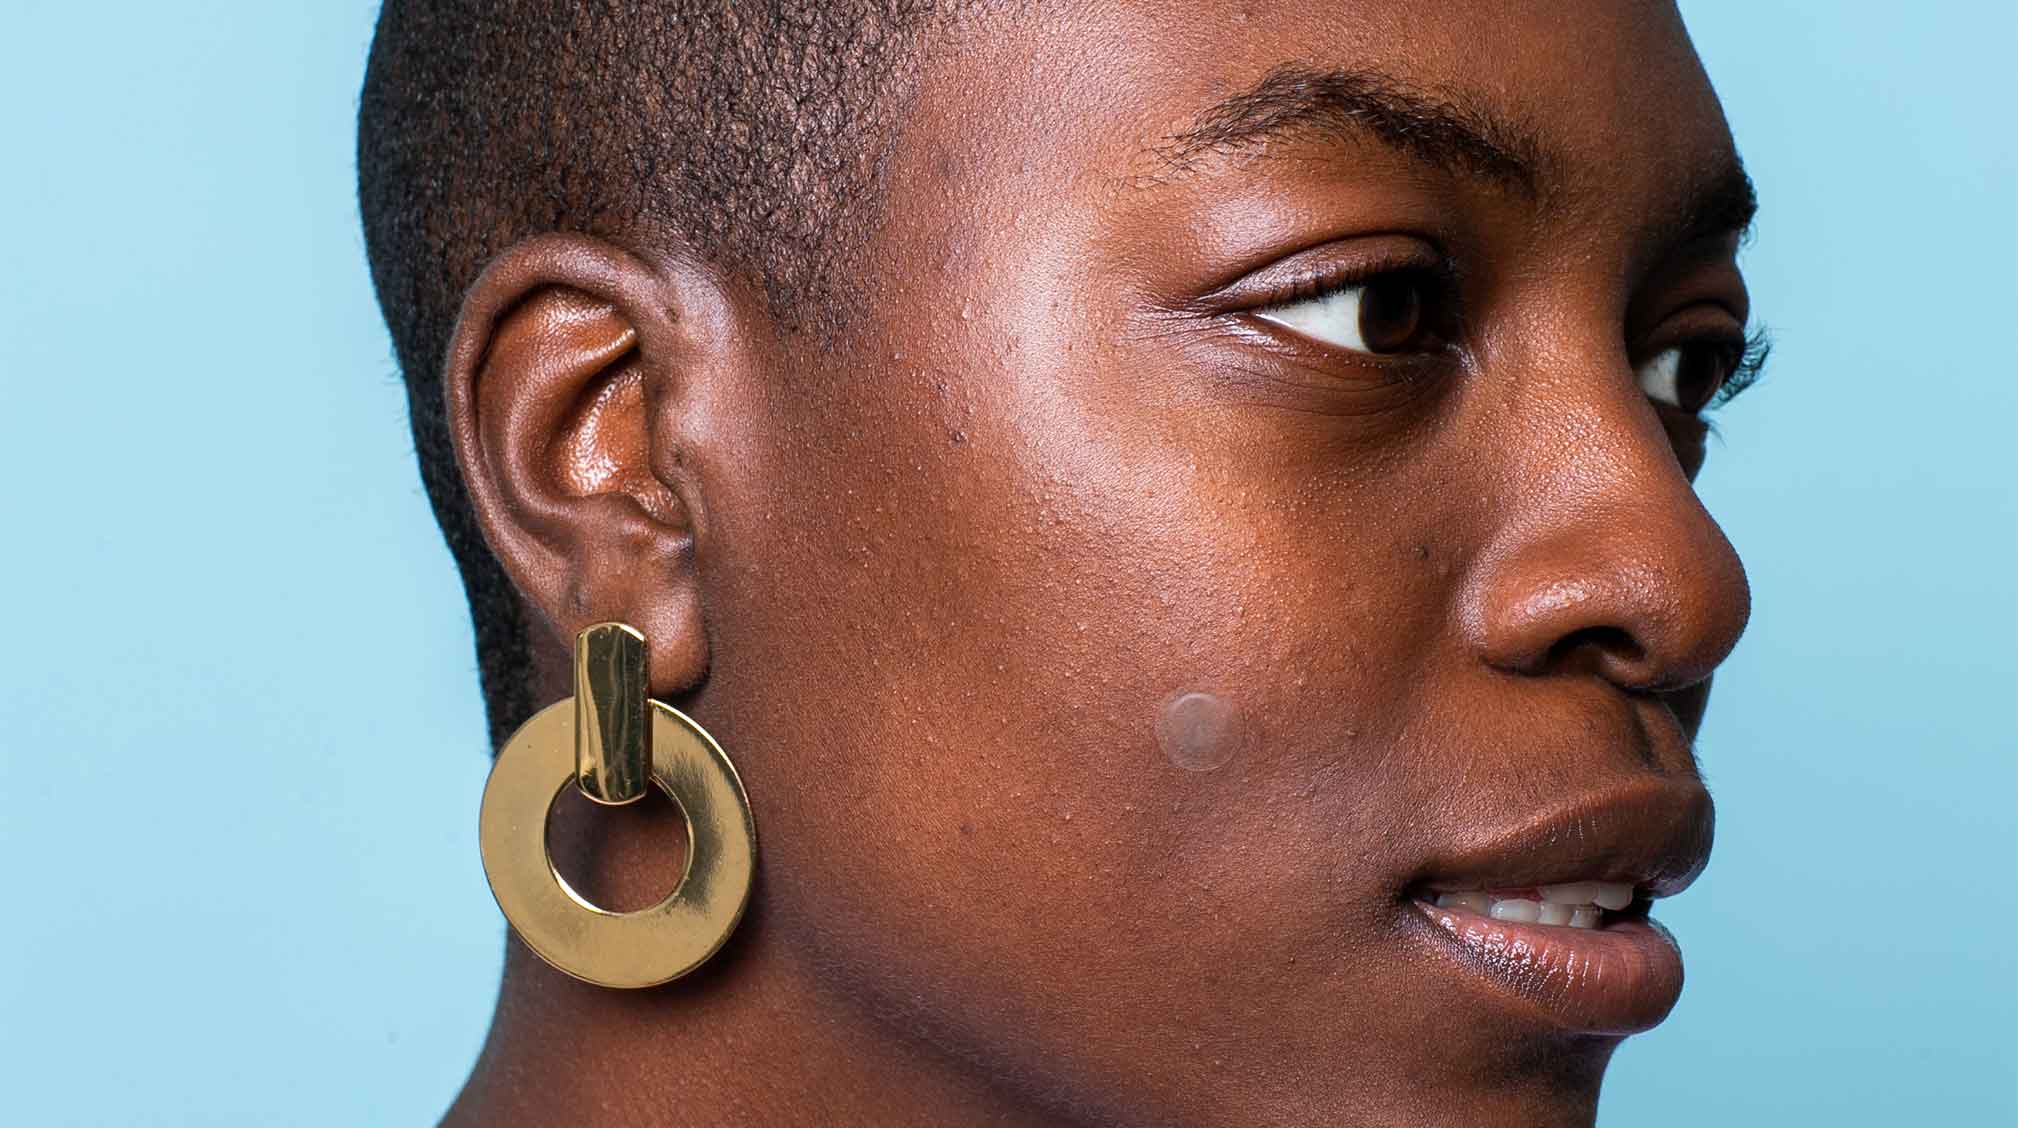 African American woman with blue background